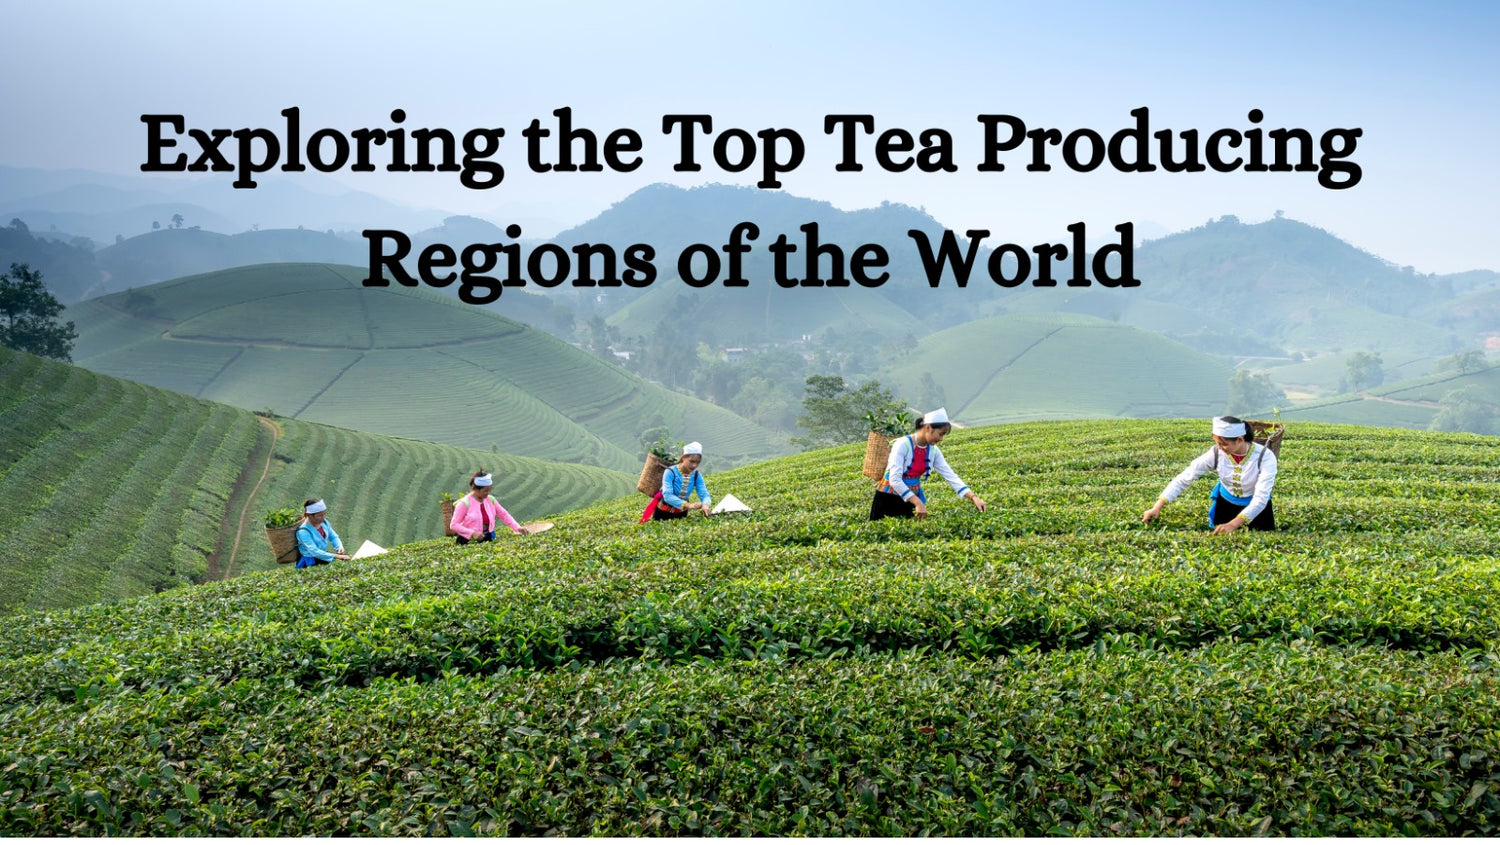 Exploring the Top Tea Producing Regions of the World